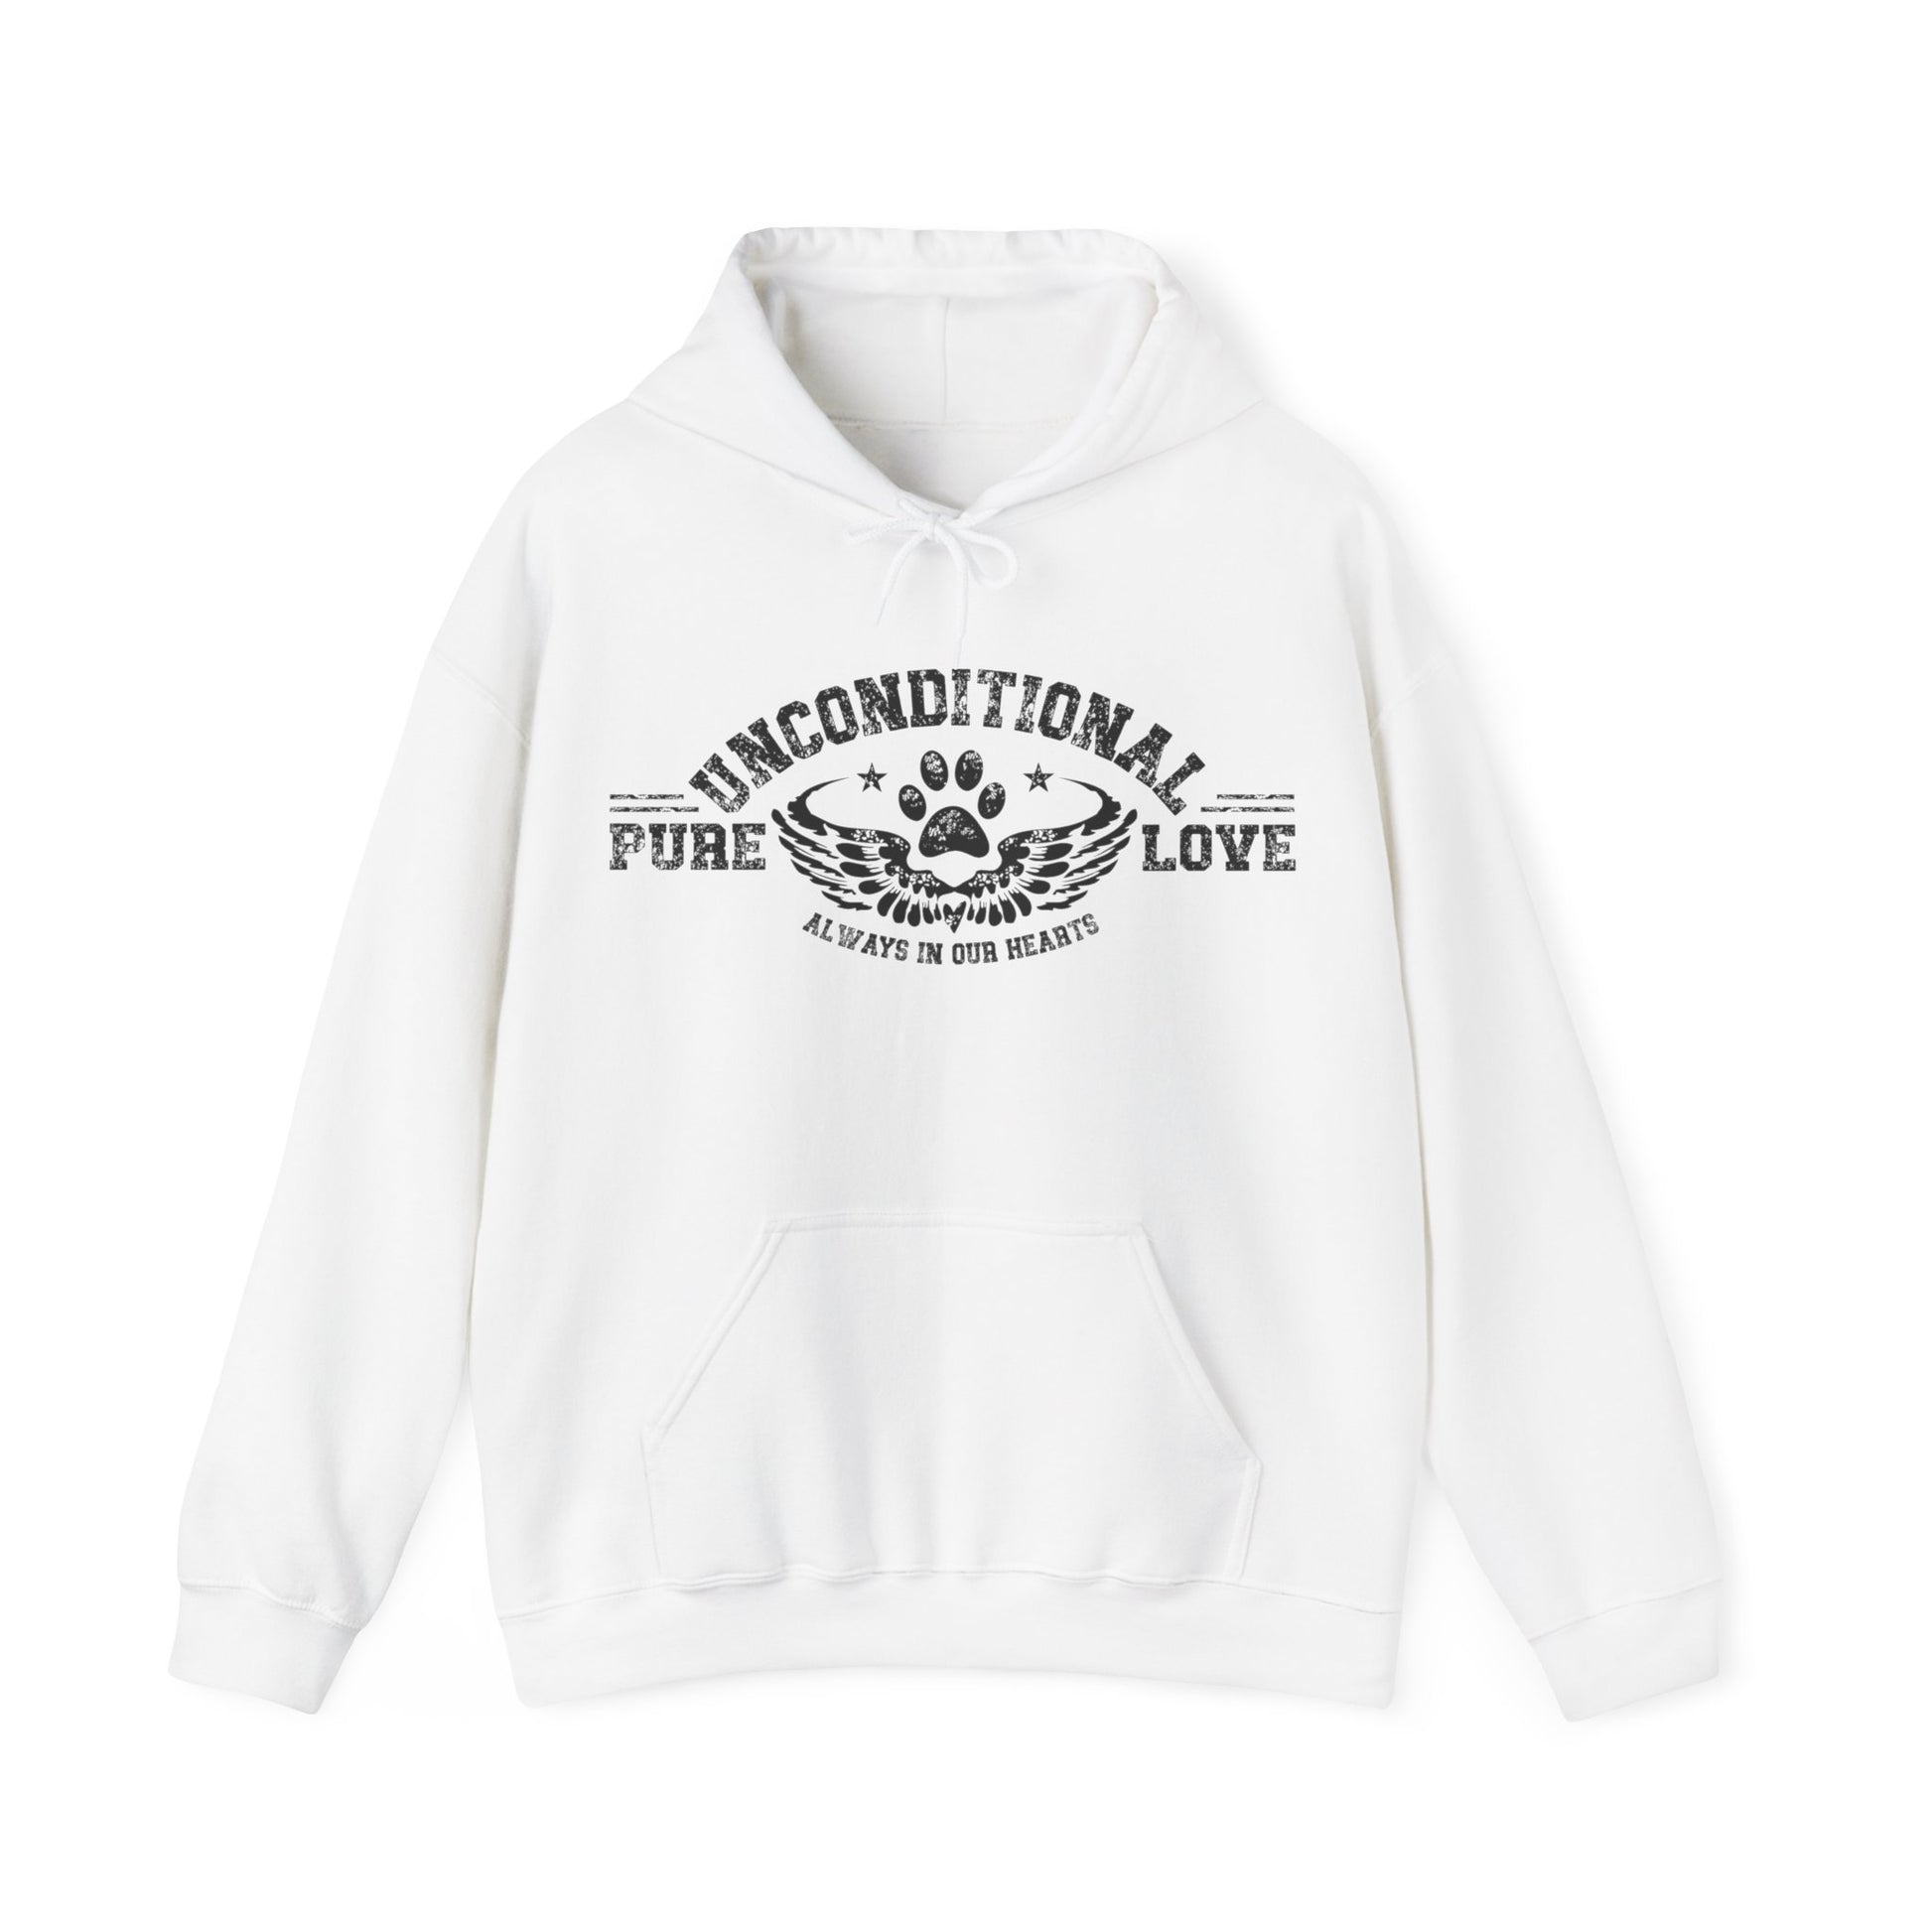 The Dogs Pure Love unisex hoodie, designed in white, gracefully features the empowering slogan 'Unconditional Pure Love, always in our hearts.' This resonant message is highlighted against a backdrop of pristine white.